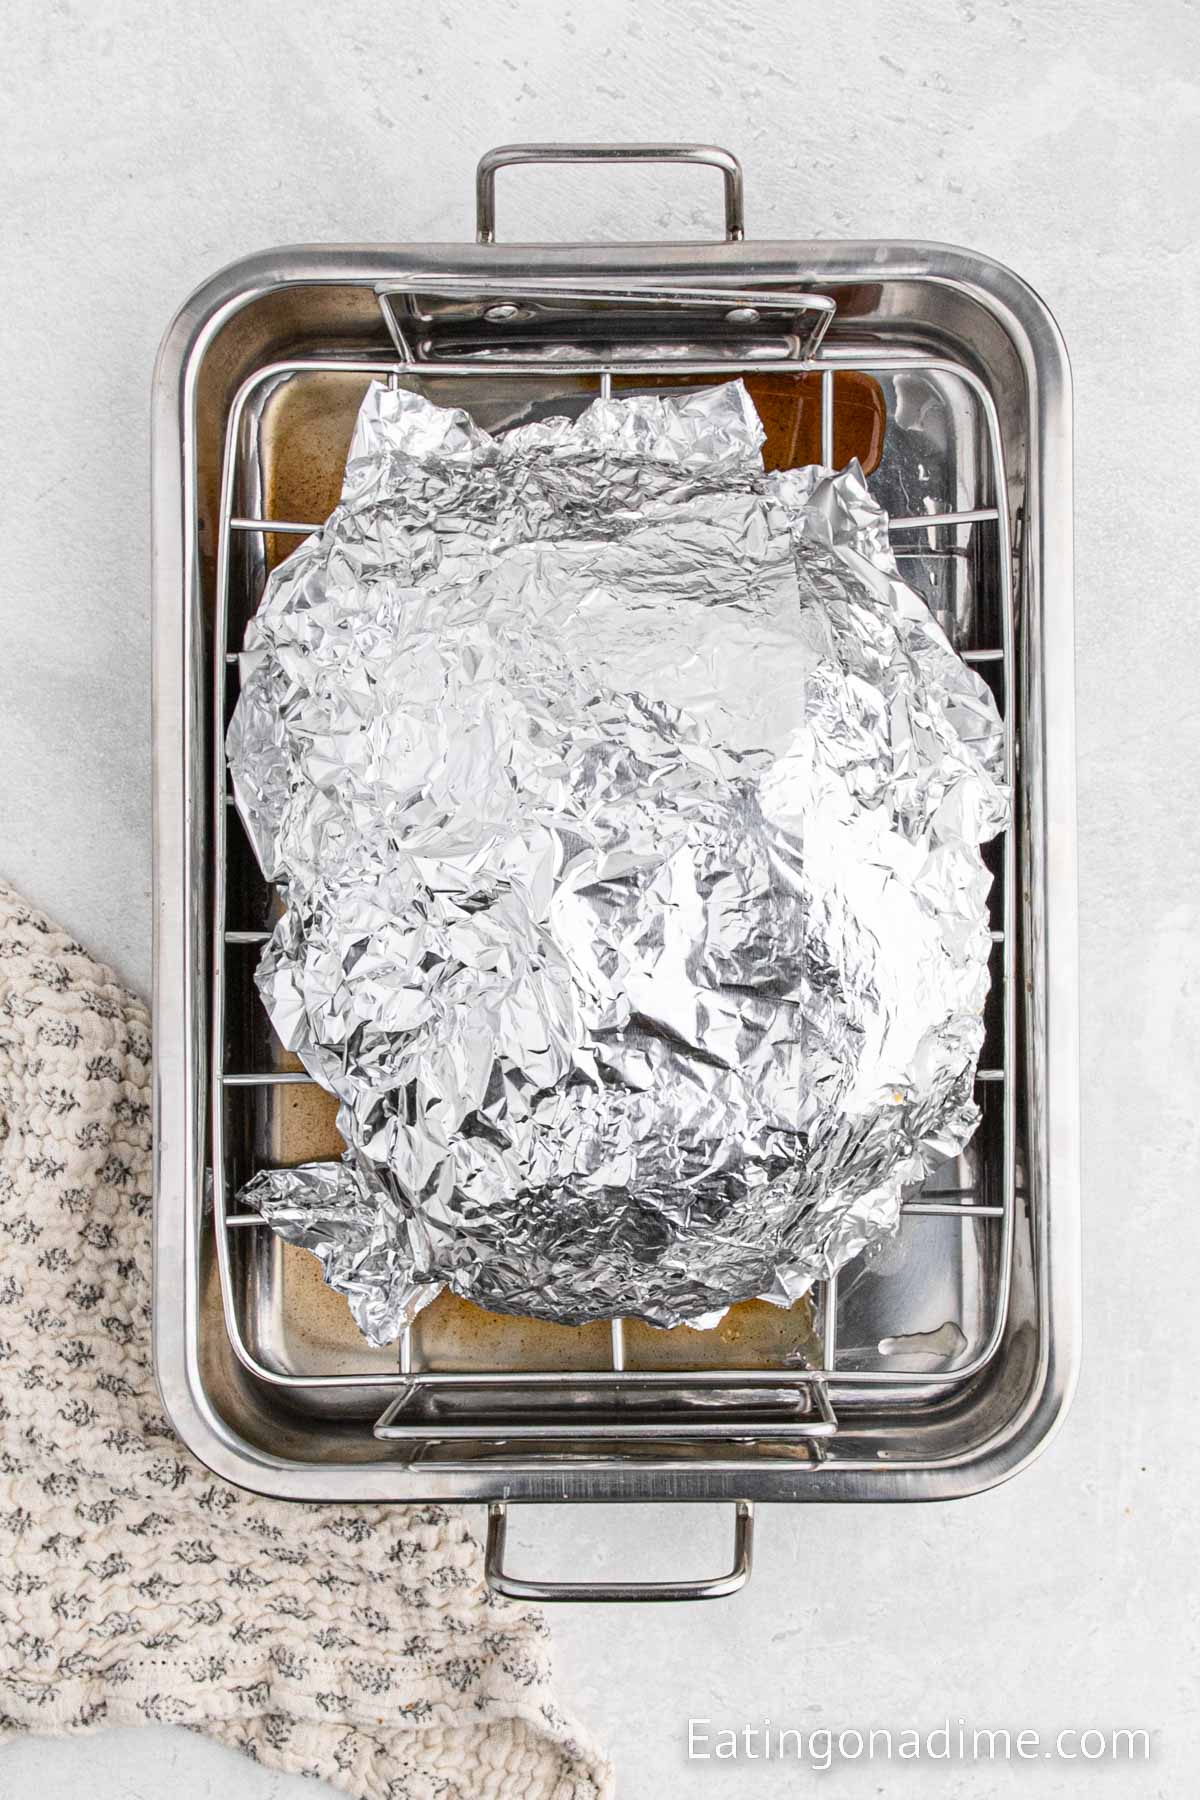 Covering the ham with foil in a roasting pan